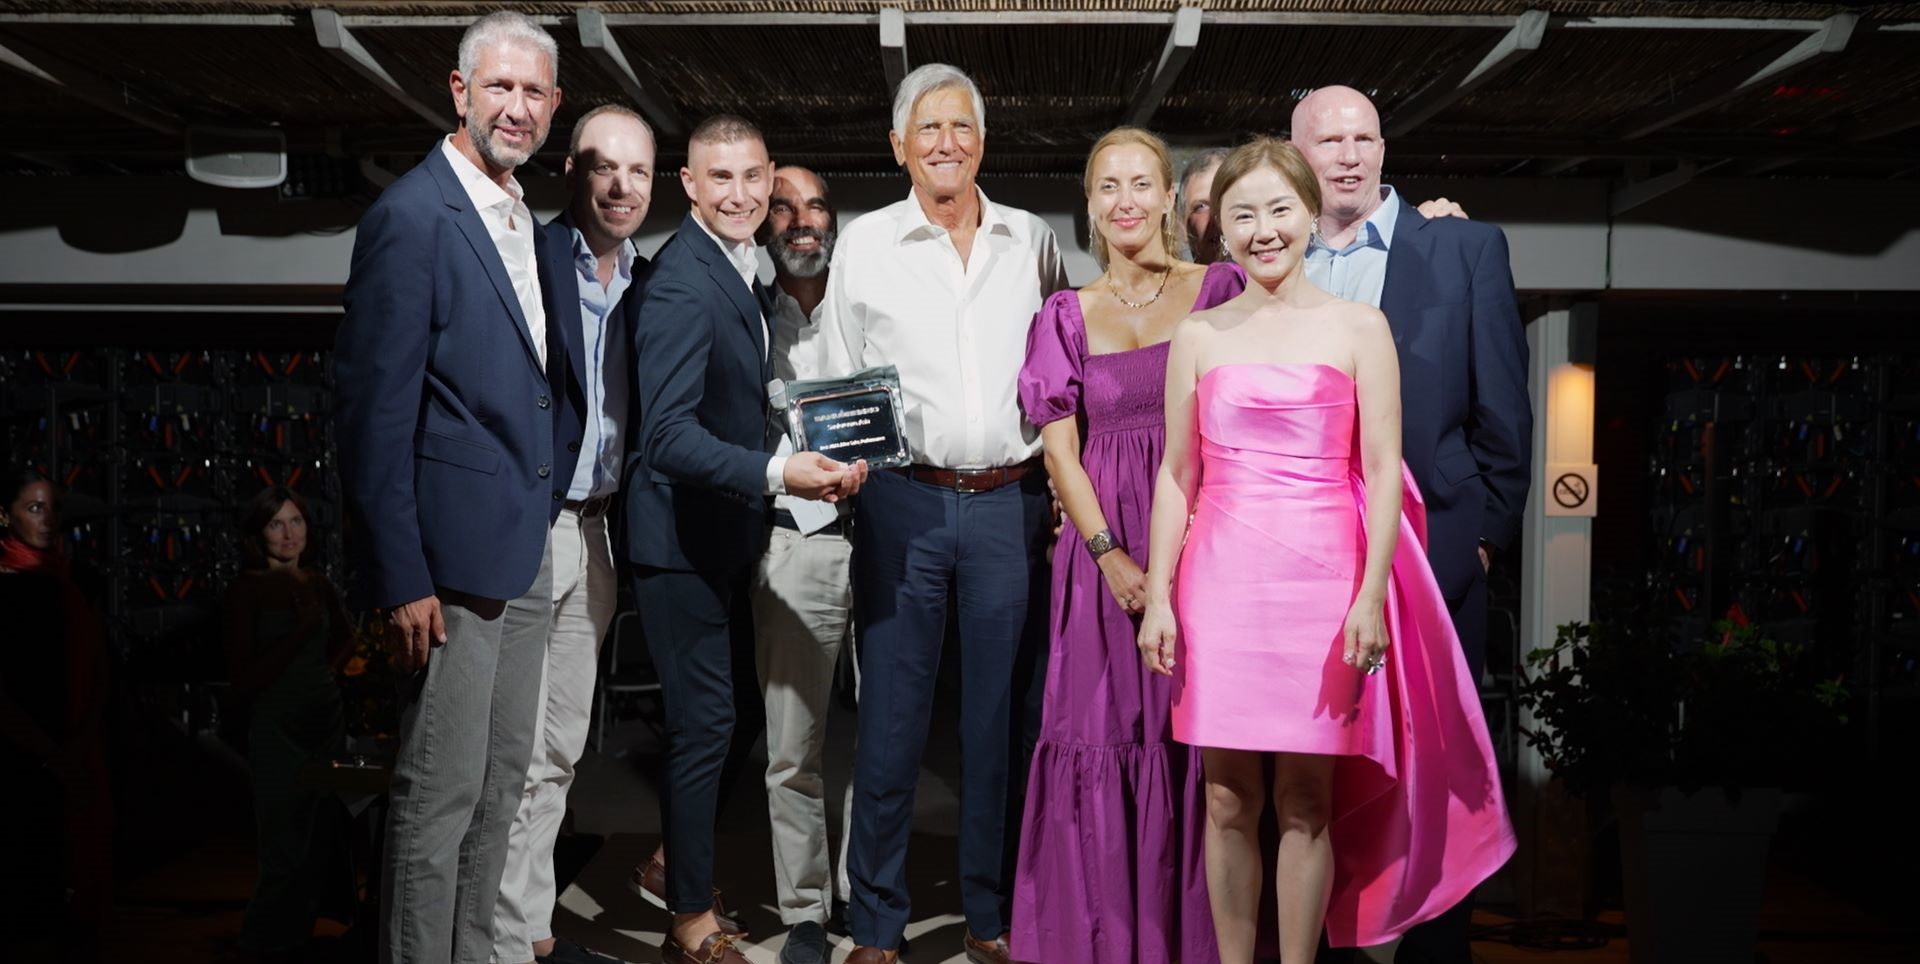 Sanlorenzo Asia Team Awarded Best Service and Best Superyacht Sales Performance at Cannes